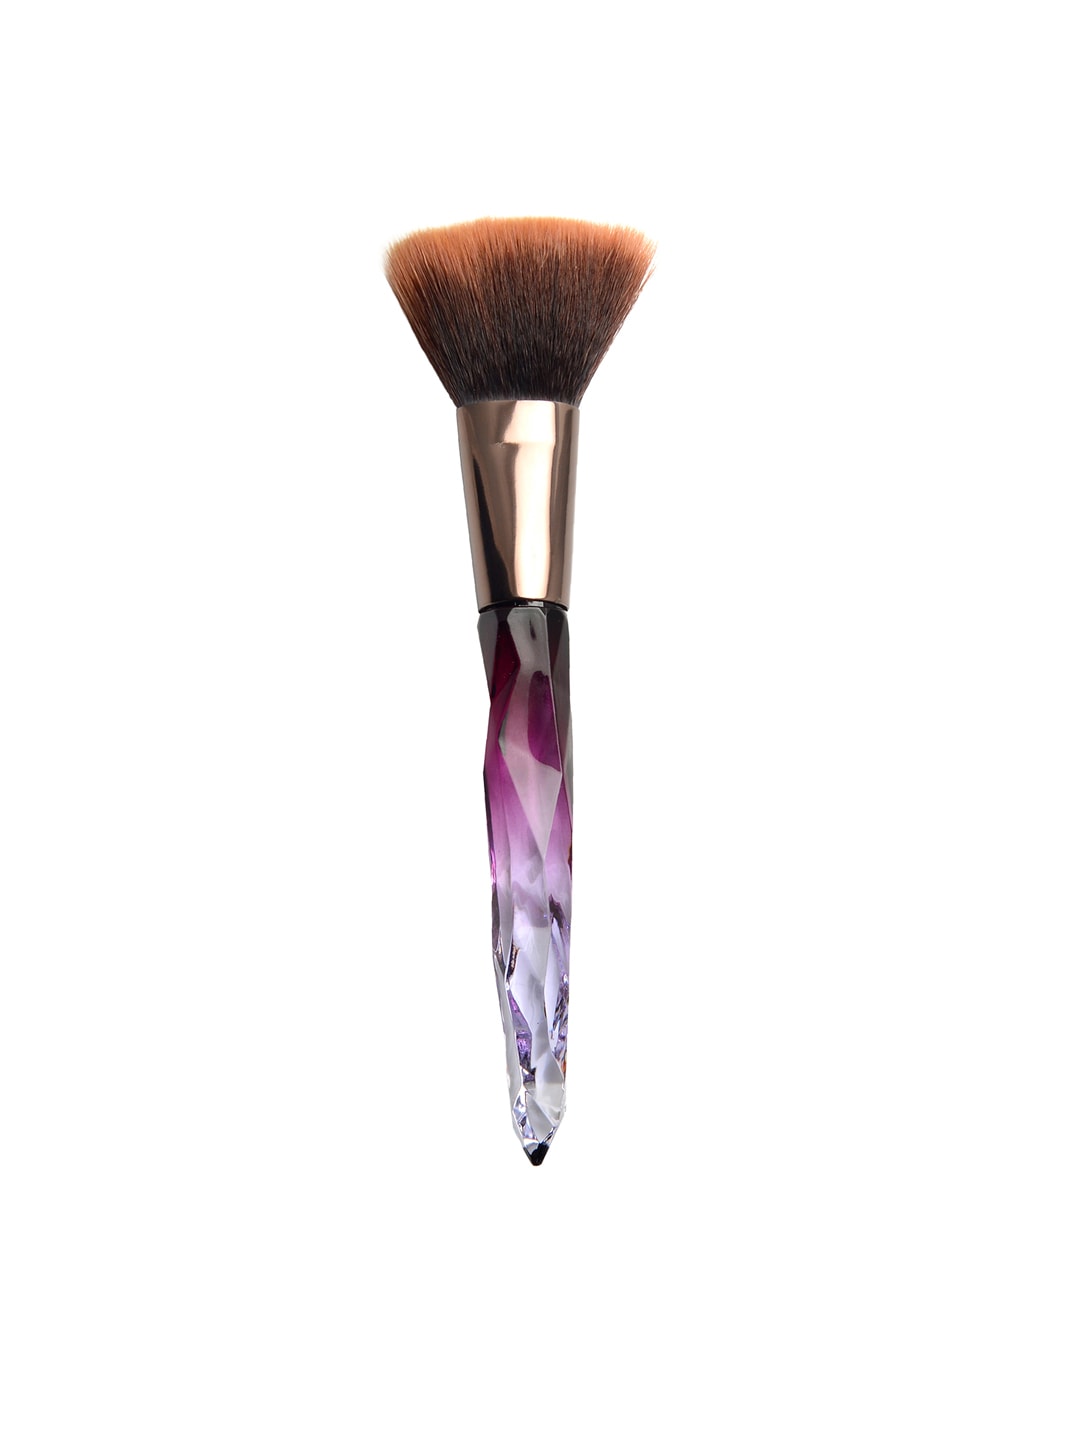 INCOLOR Incolor Exposed Makeup Contour Brush 03 Price in India